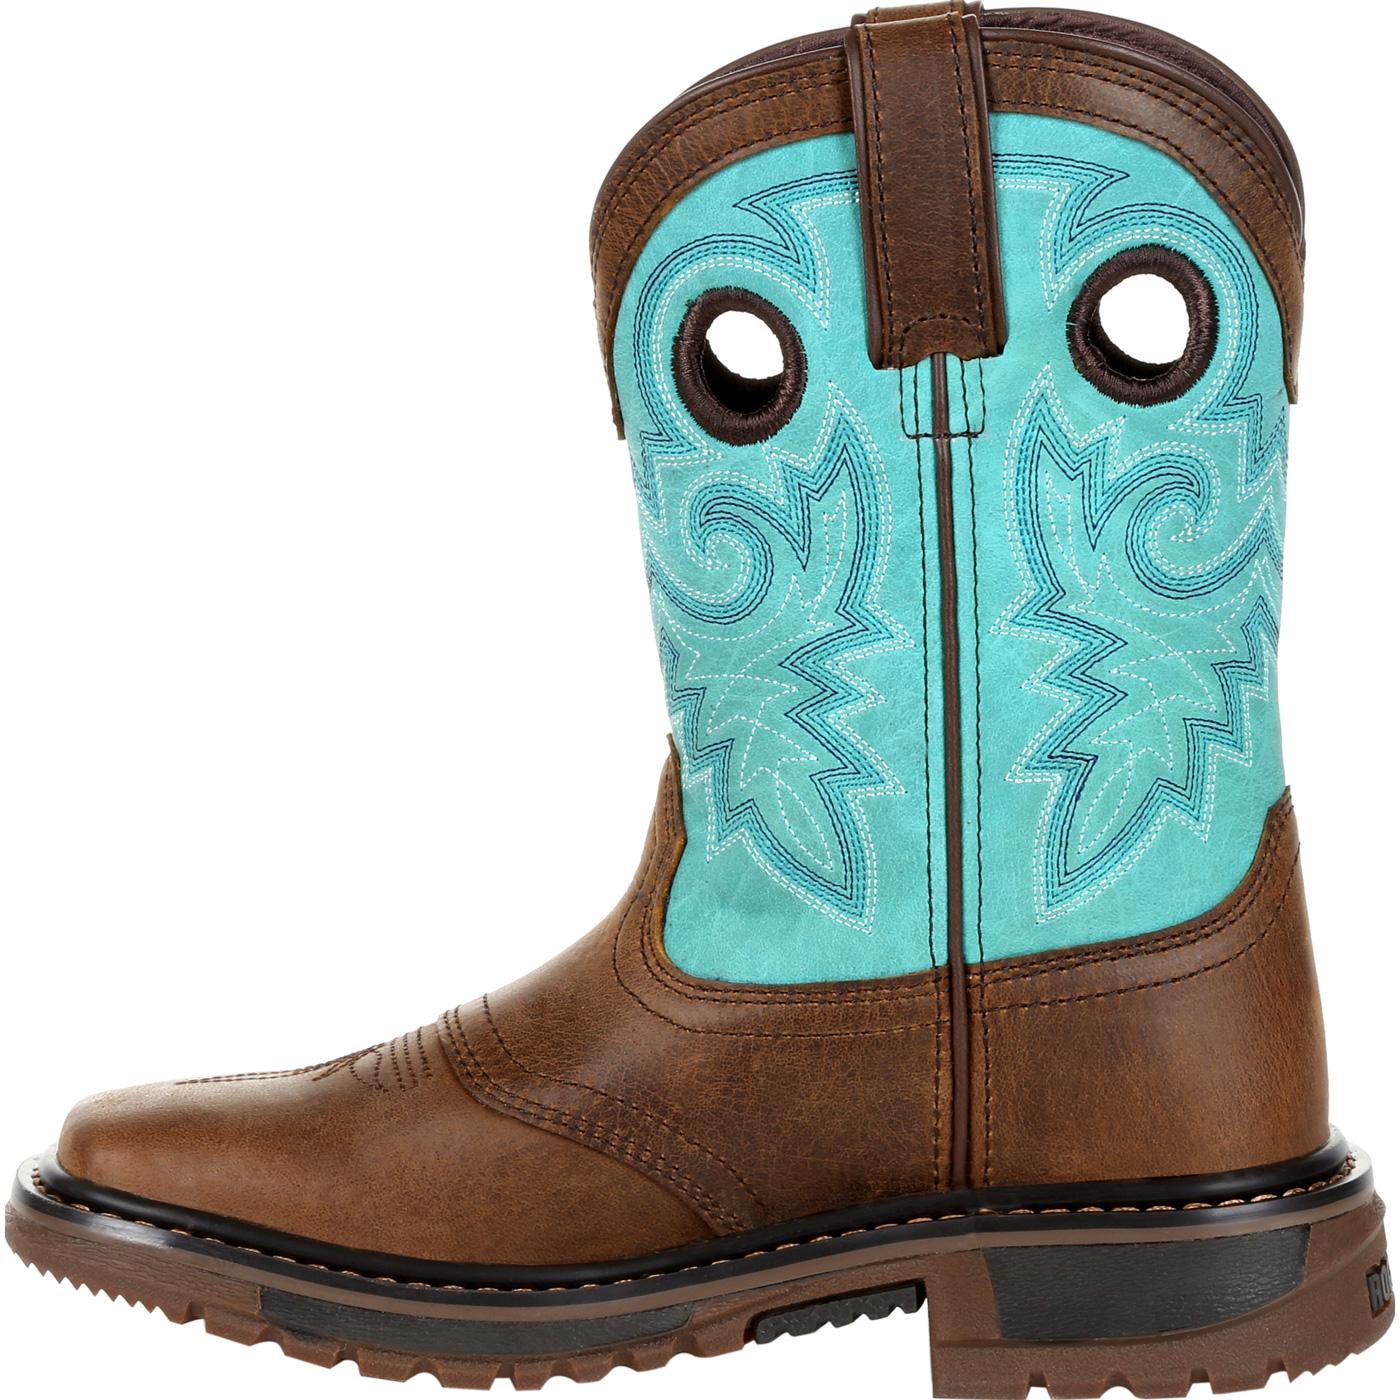 Rocky Kid's Original Ride FLX Western Boot Size 2.5(M) - image 5 of 7